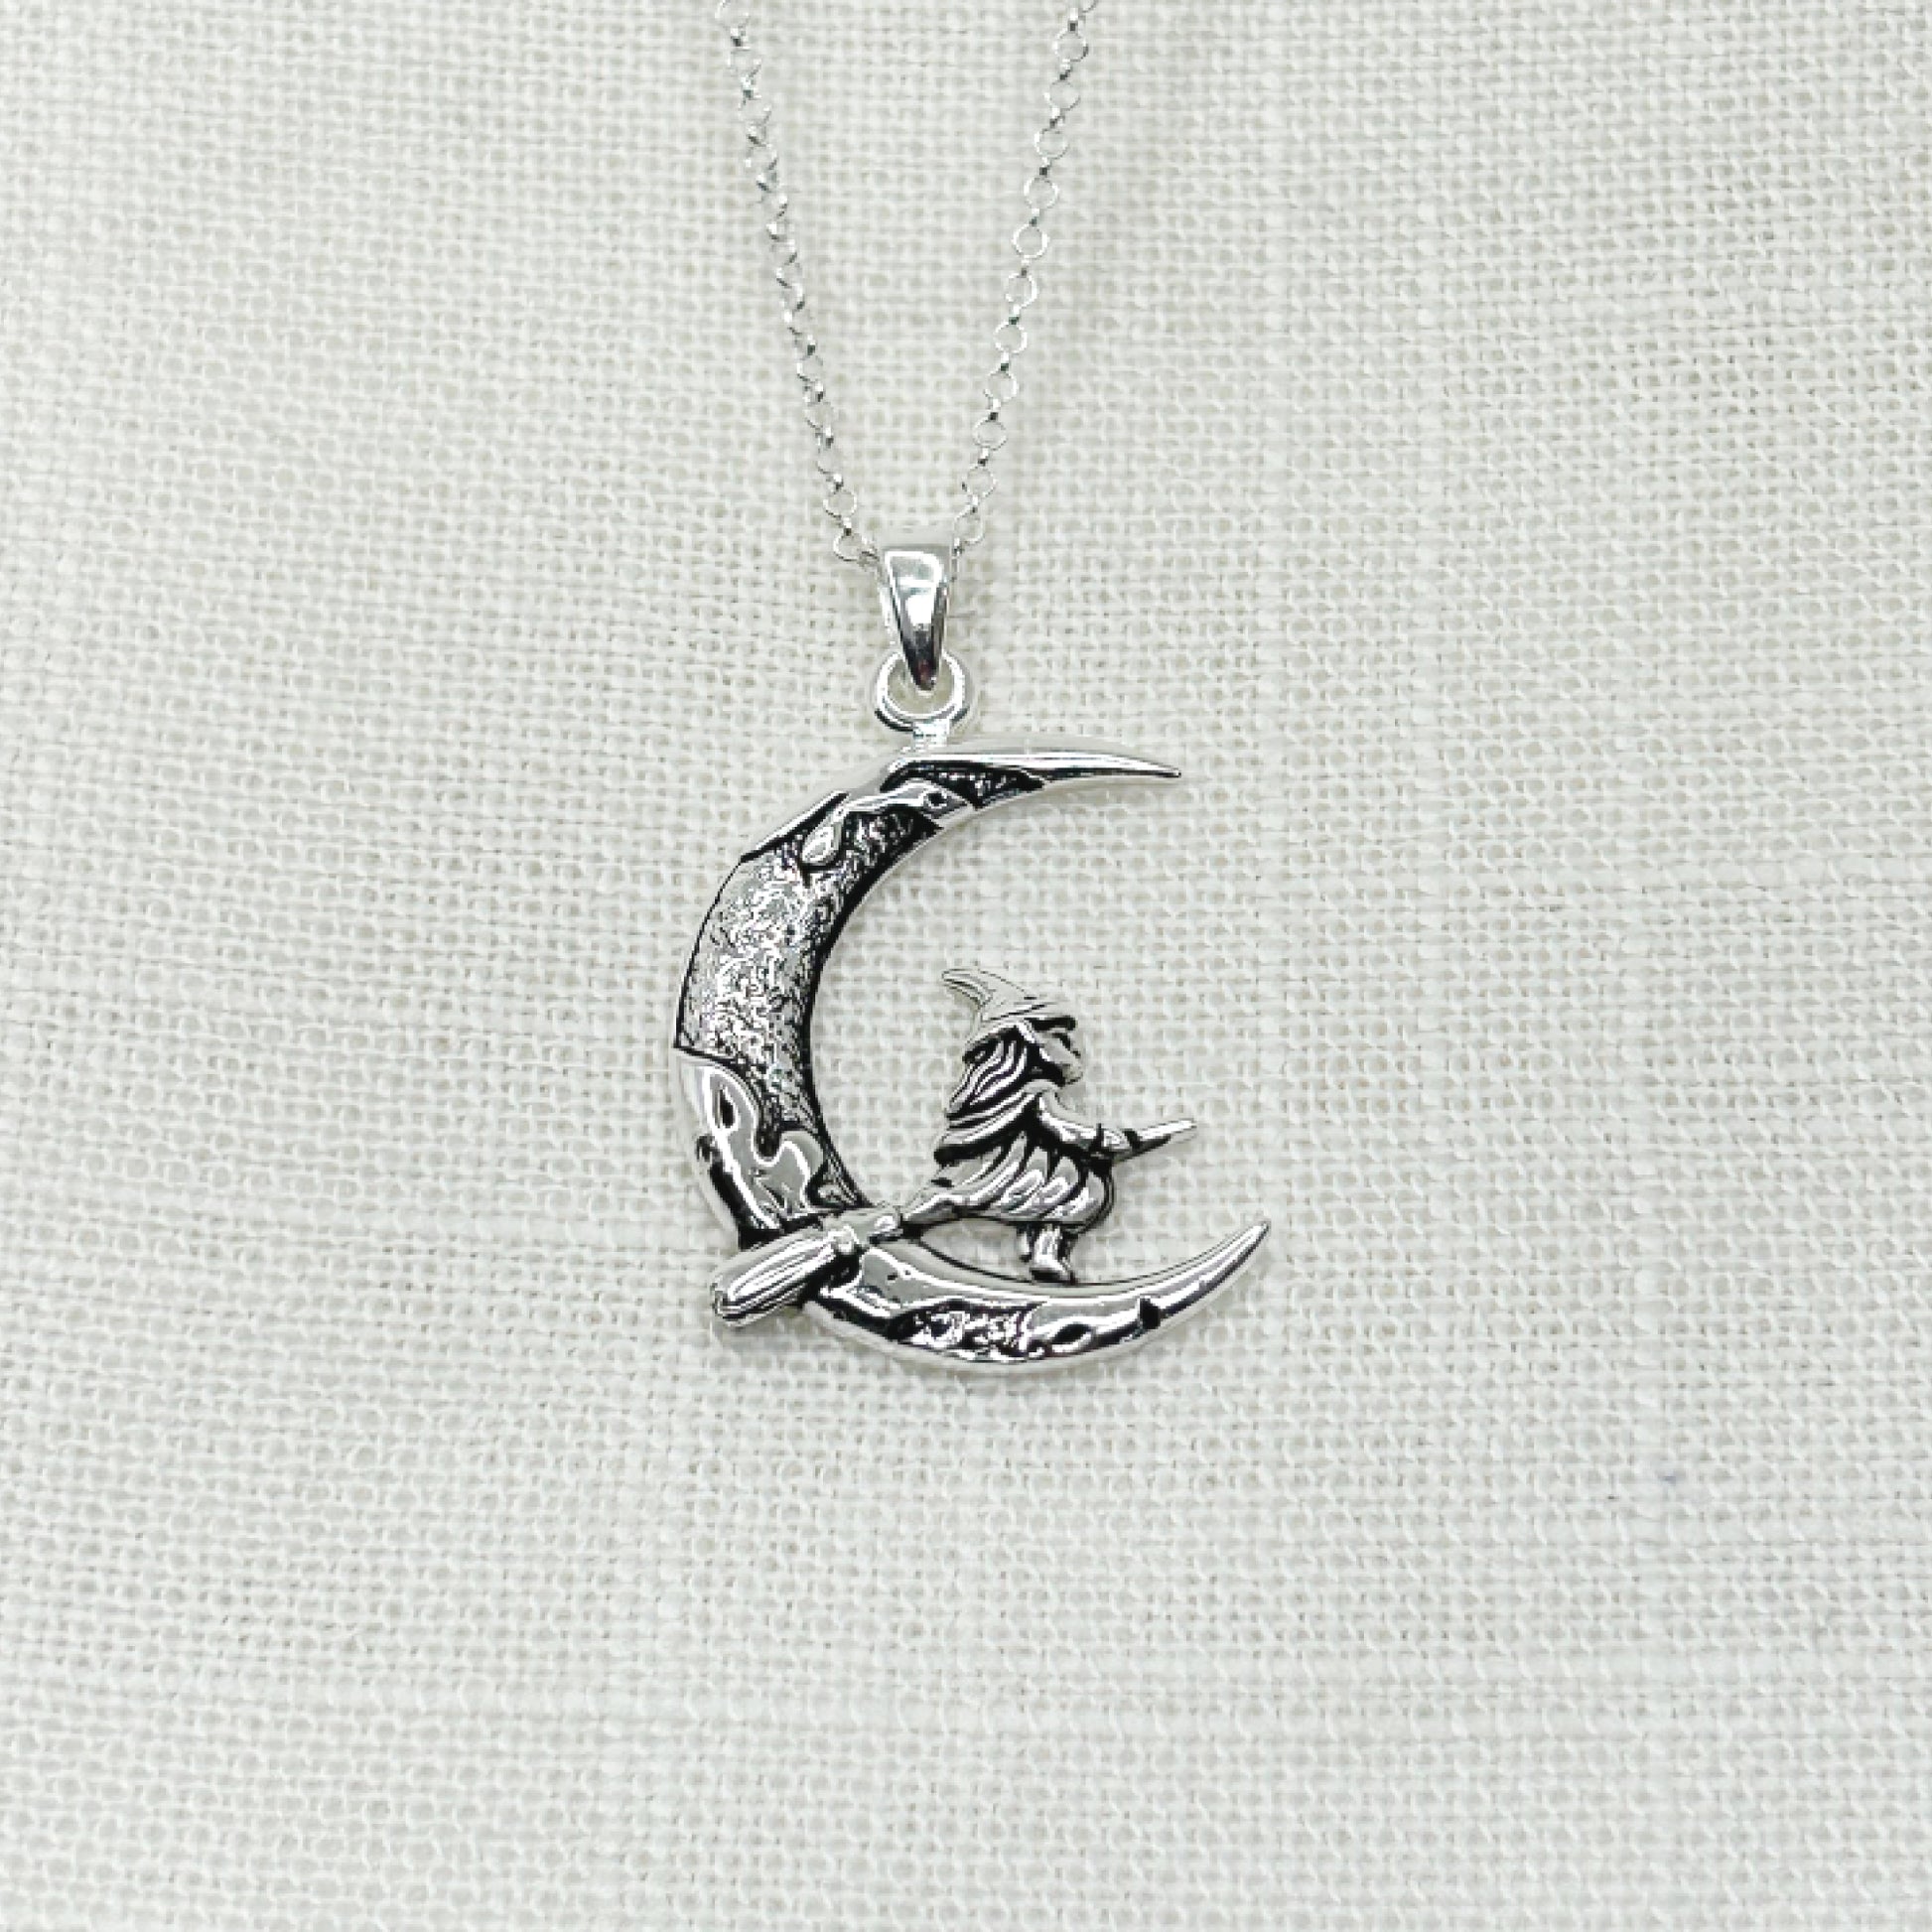 This 925 Silver Witch and Moon pendant has wonderful detailing. The Witch is flying across a crescent moon on her trusty broomstick. The moon has been slightly oxidized to show off it's craters and crevices perfectly, as has also the little Witch, with her long hair, wearing a cloak and her pointed hat. The pendant measures approx 3.25cm in height including the bale x 2cm wide. This piece comes complete on a 20 inch 925 chain. All jewellery comes gift boxed.